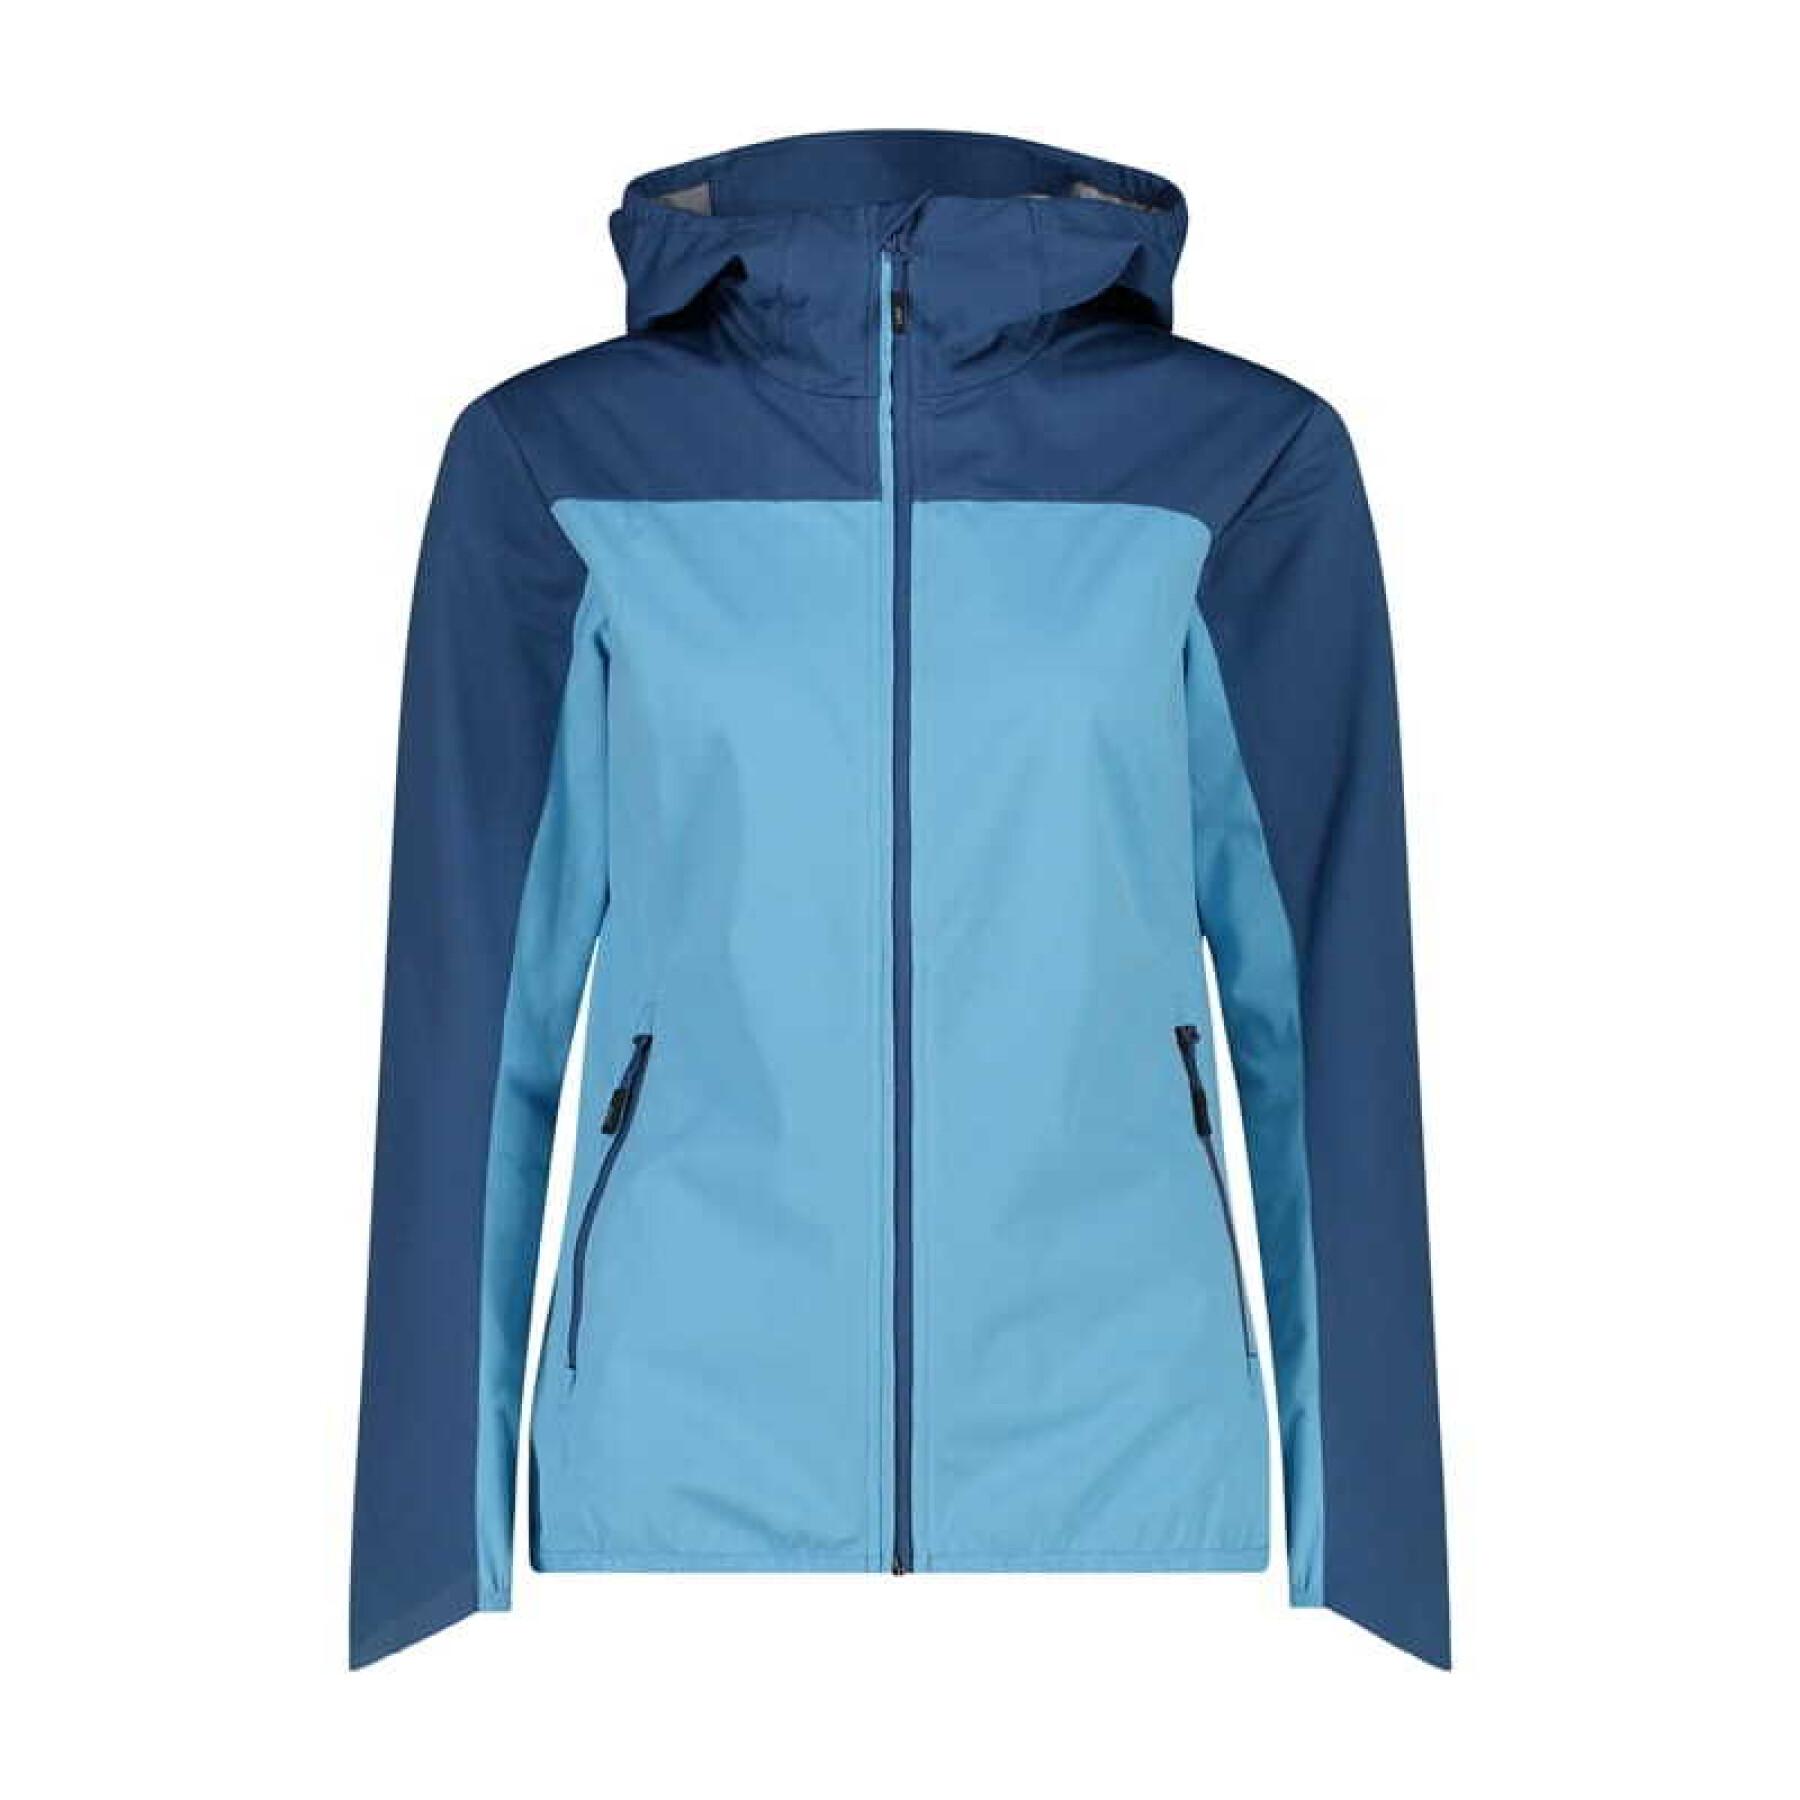 waterproof Classic Practices jacket - Hiking - hiking hooded Women\'s - CMP